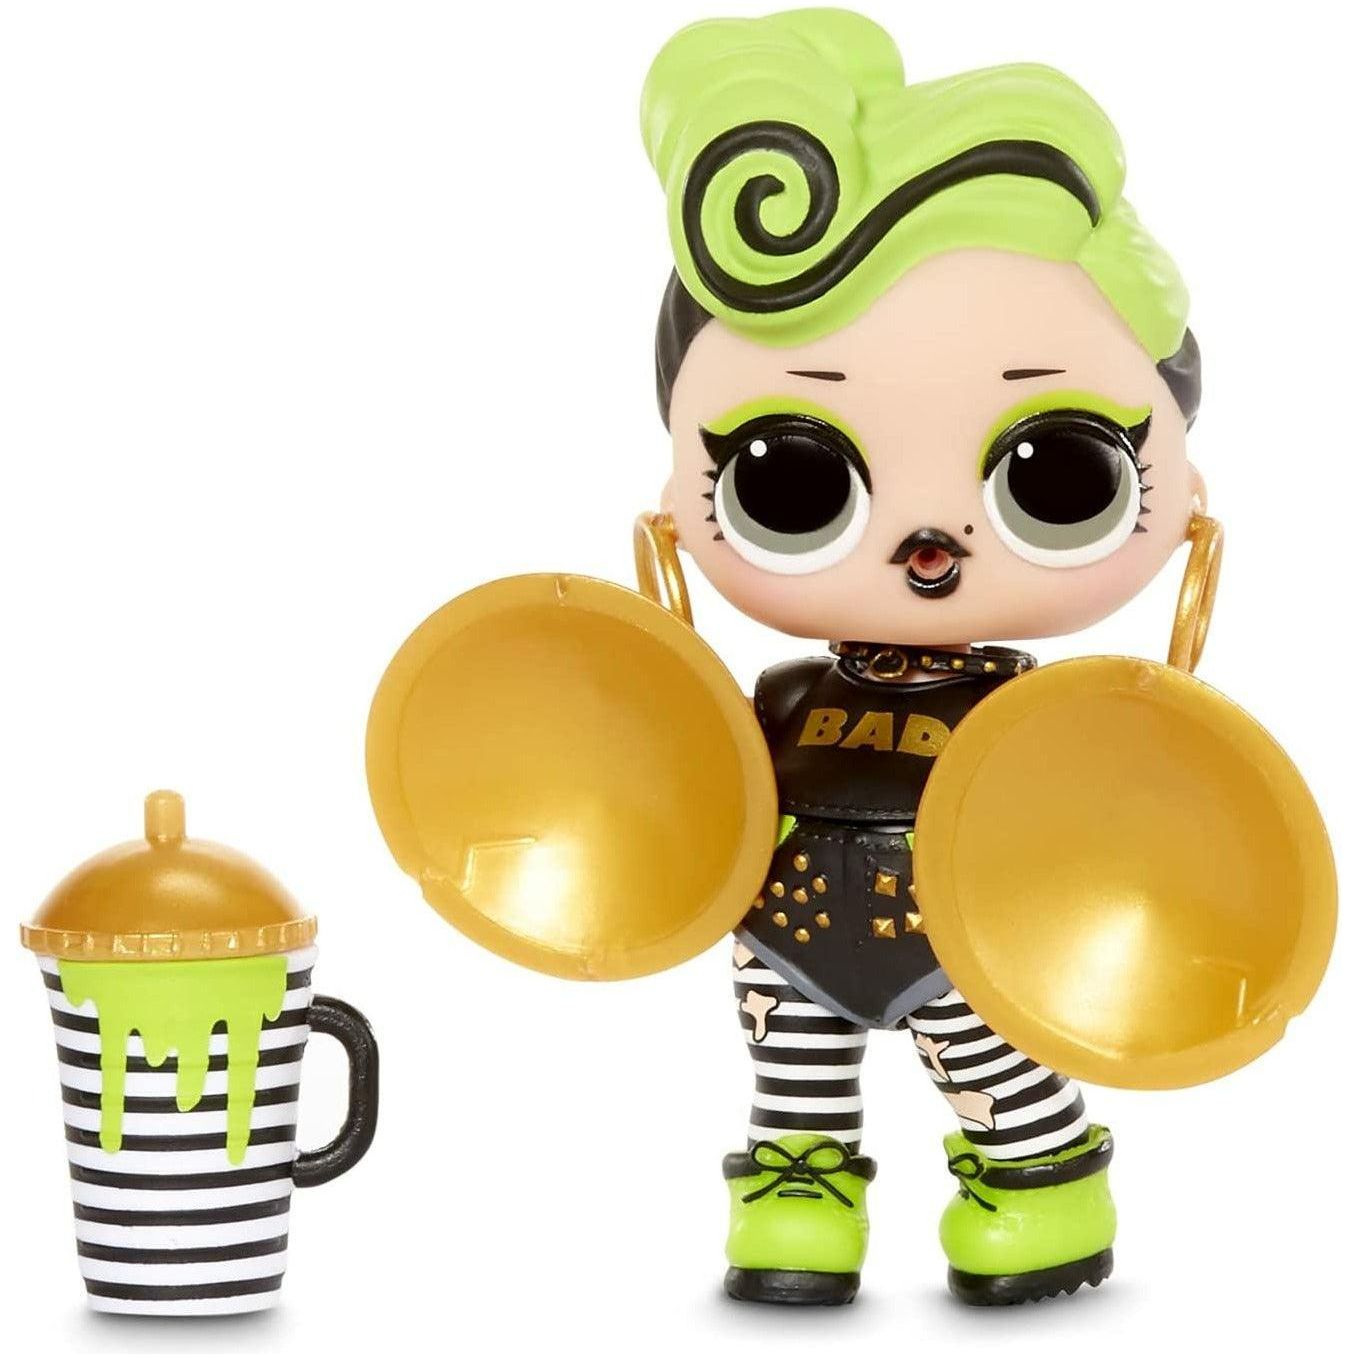 LOL Surprise Remix Rock Dolls Lil Sisters with 7 Surprises Including Instrument - Collectible Doll Toy - BumbleToys - 5-7 Years, Dolls, Girls, L.O.L, Miniature Dolls & Accessories, OXE, Pre-Order